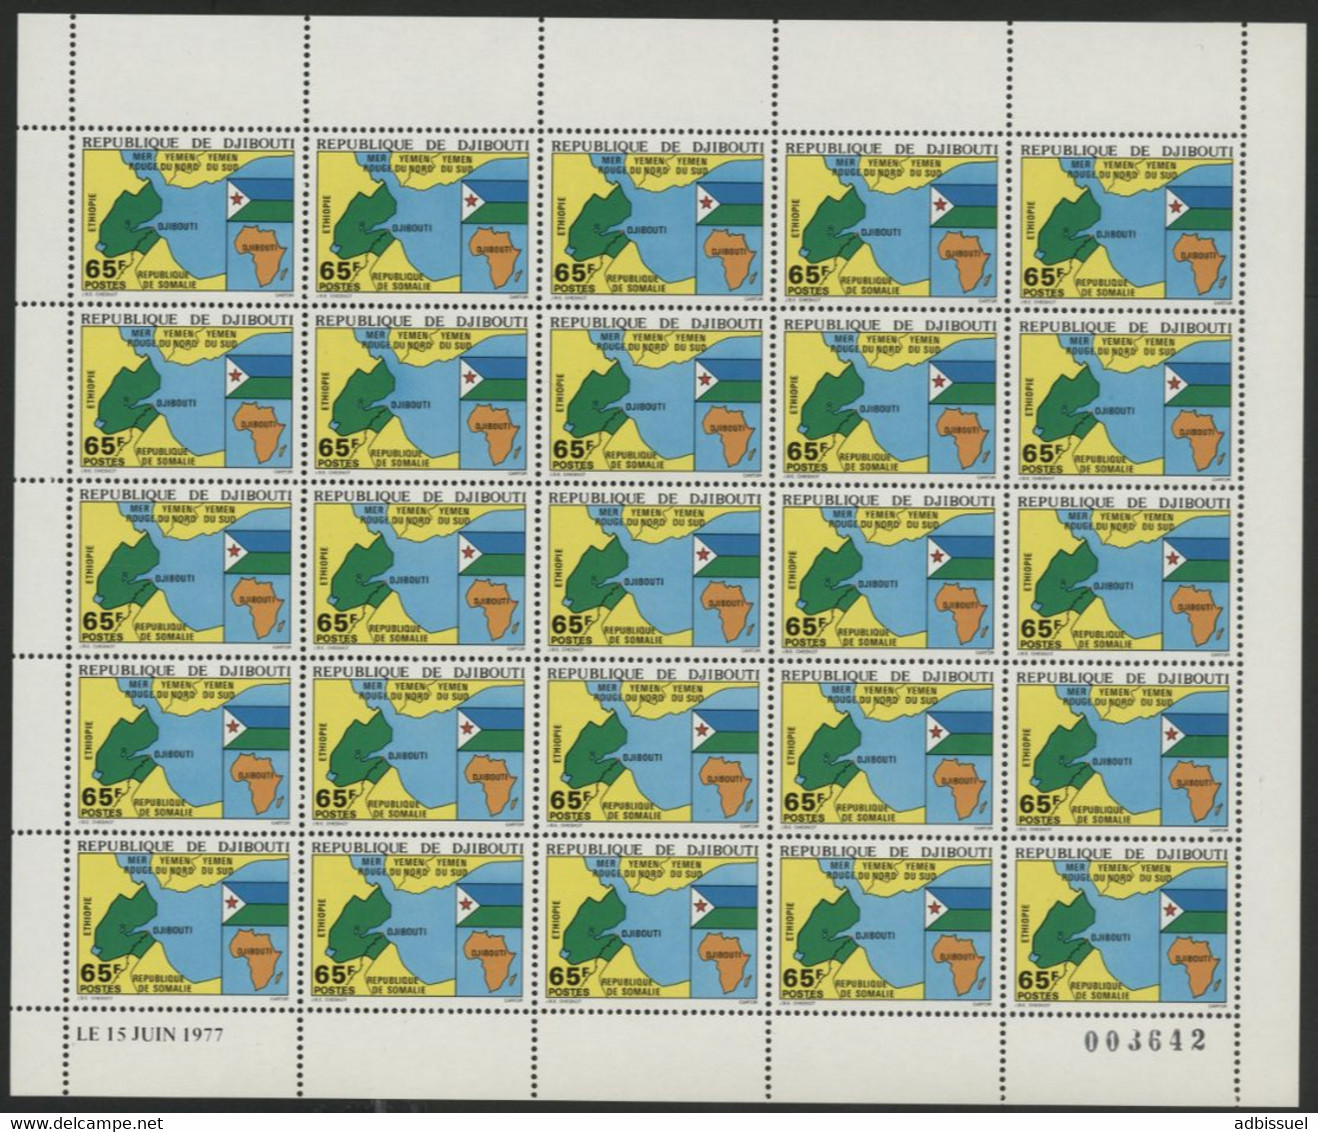 DJIBOUTI N° 459 COTE 50 € FEUILLE COMPLETE DE 25 EXEMPLAIRES NEUFS MNH ** INDEPENDANCE.  TB - Geography